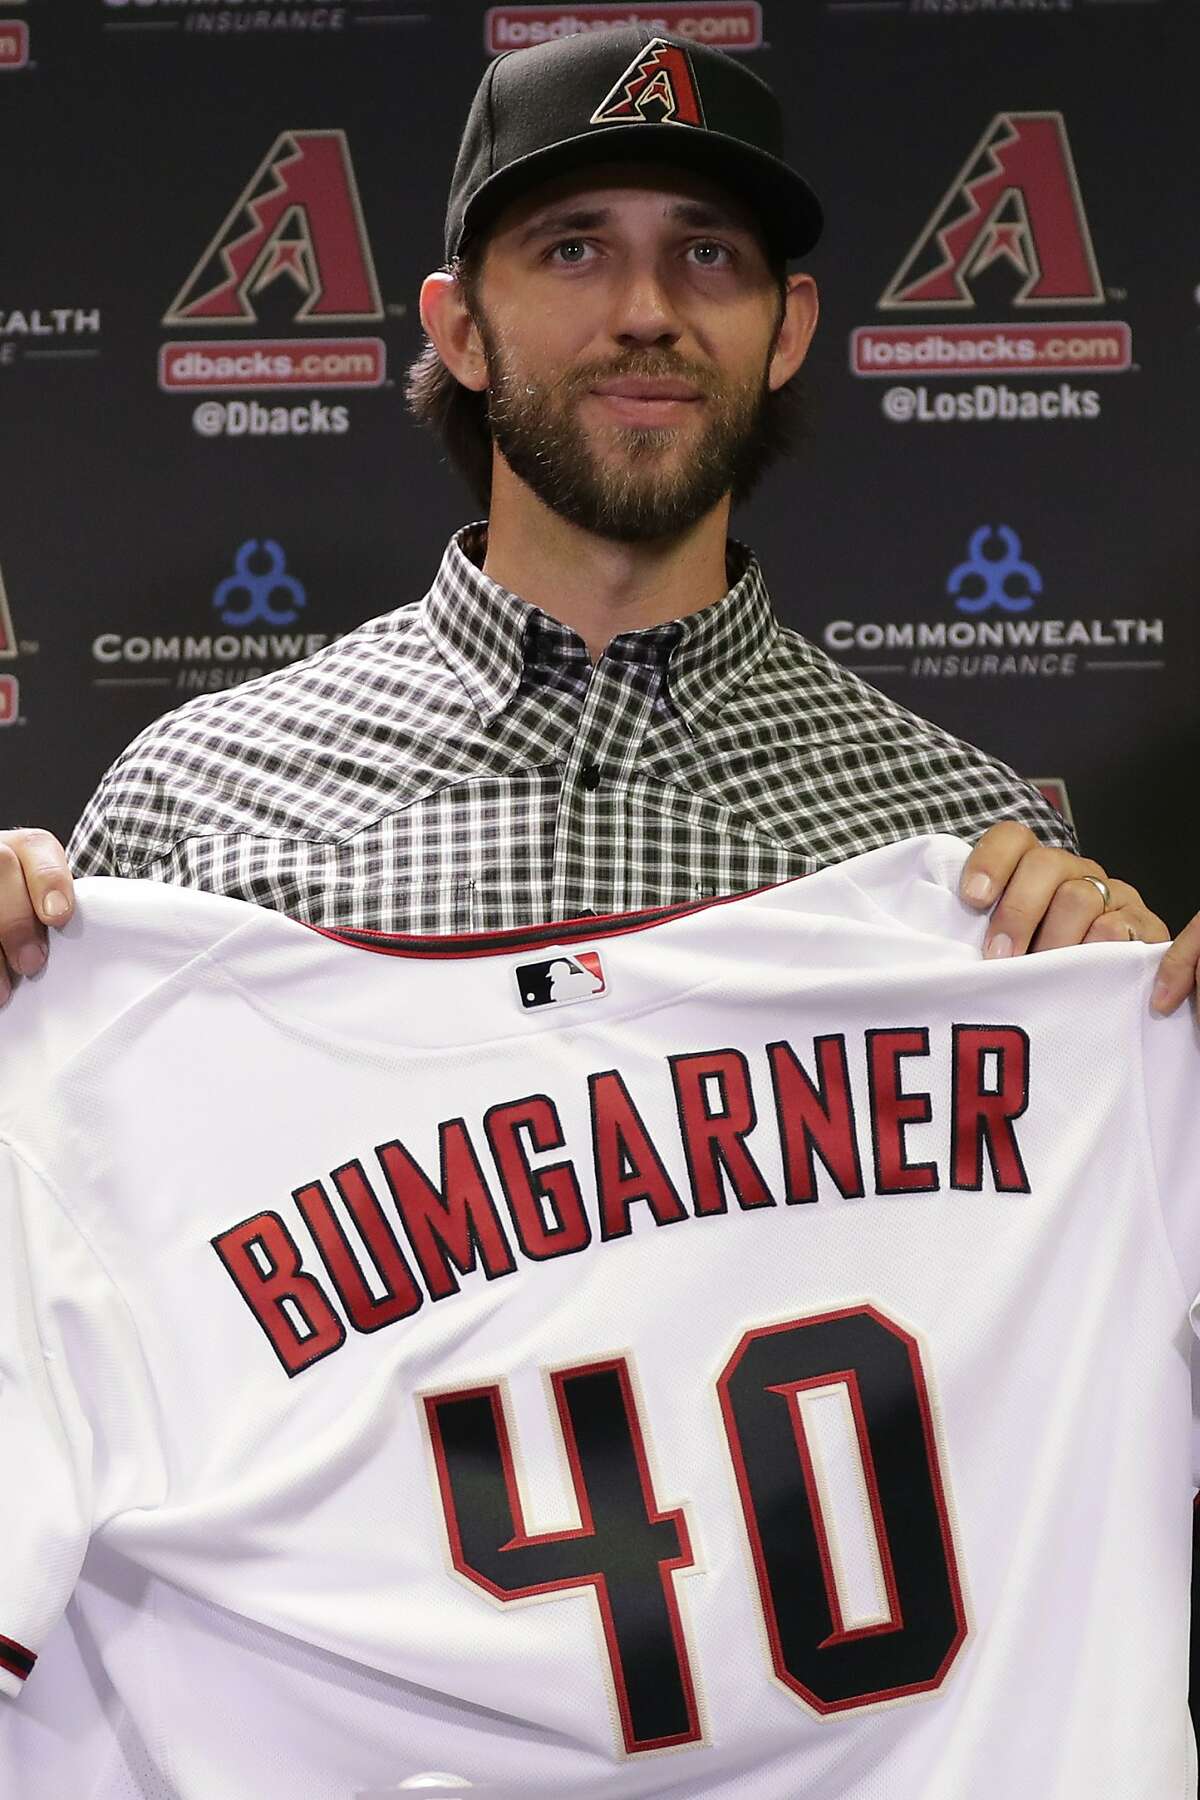 Newly acquired Arizona Diamondbacks pitcher Madison Bumgarner holds his new jersey after being introduced during a team availability, Tuesday, Dec. 17, 2019, in Phoenix. (AP Photo/Matt York)